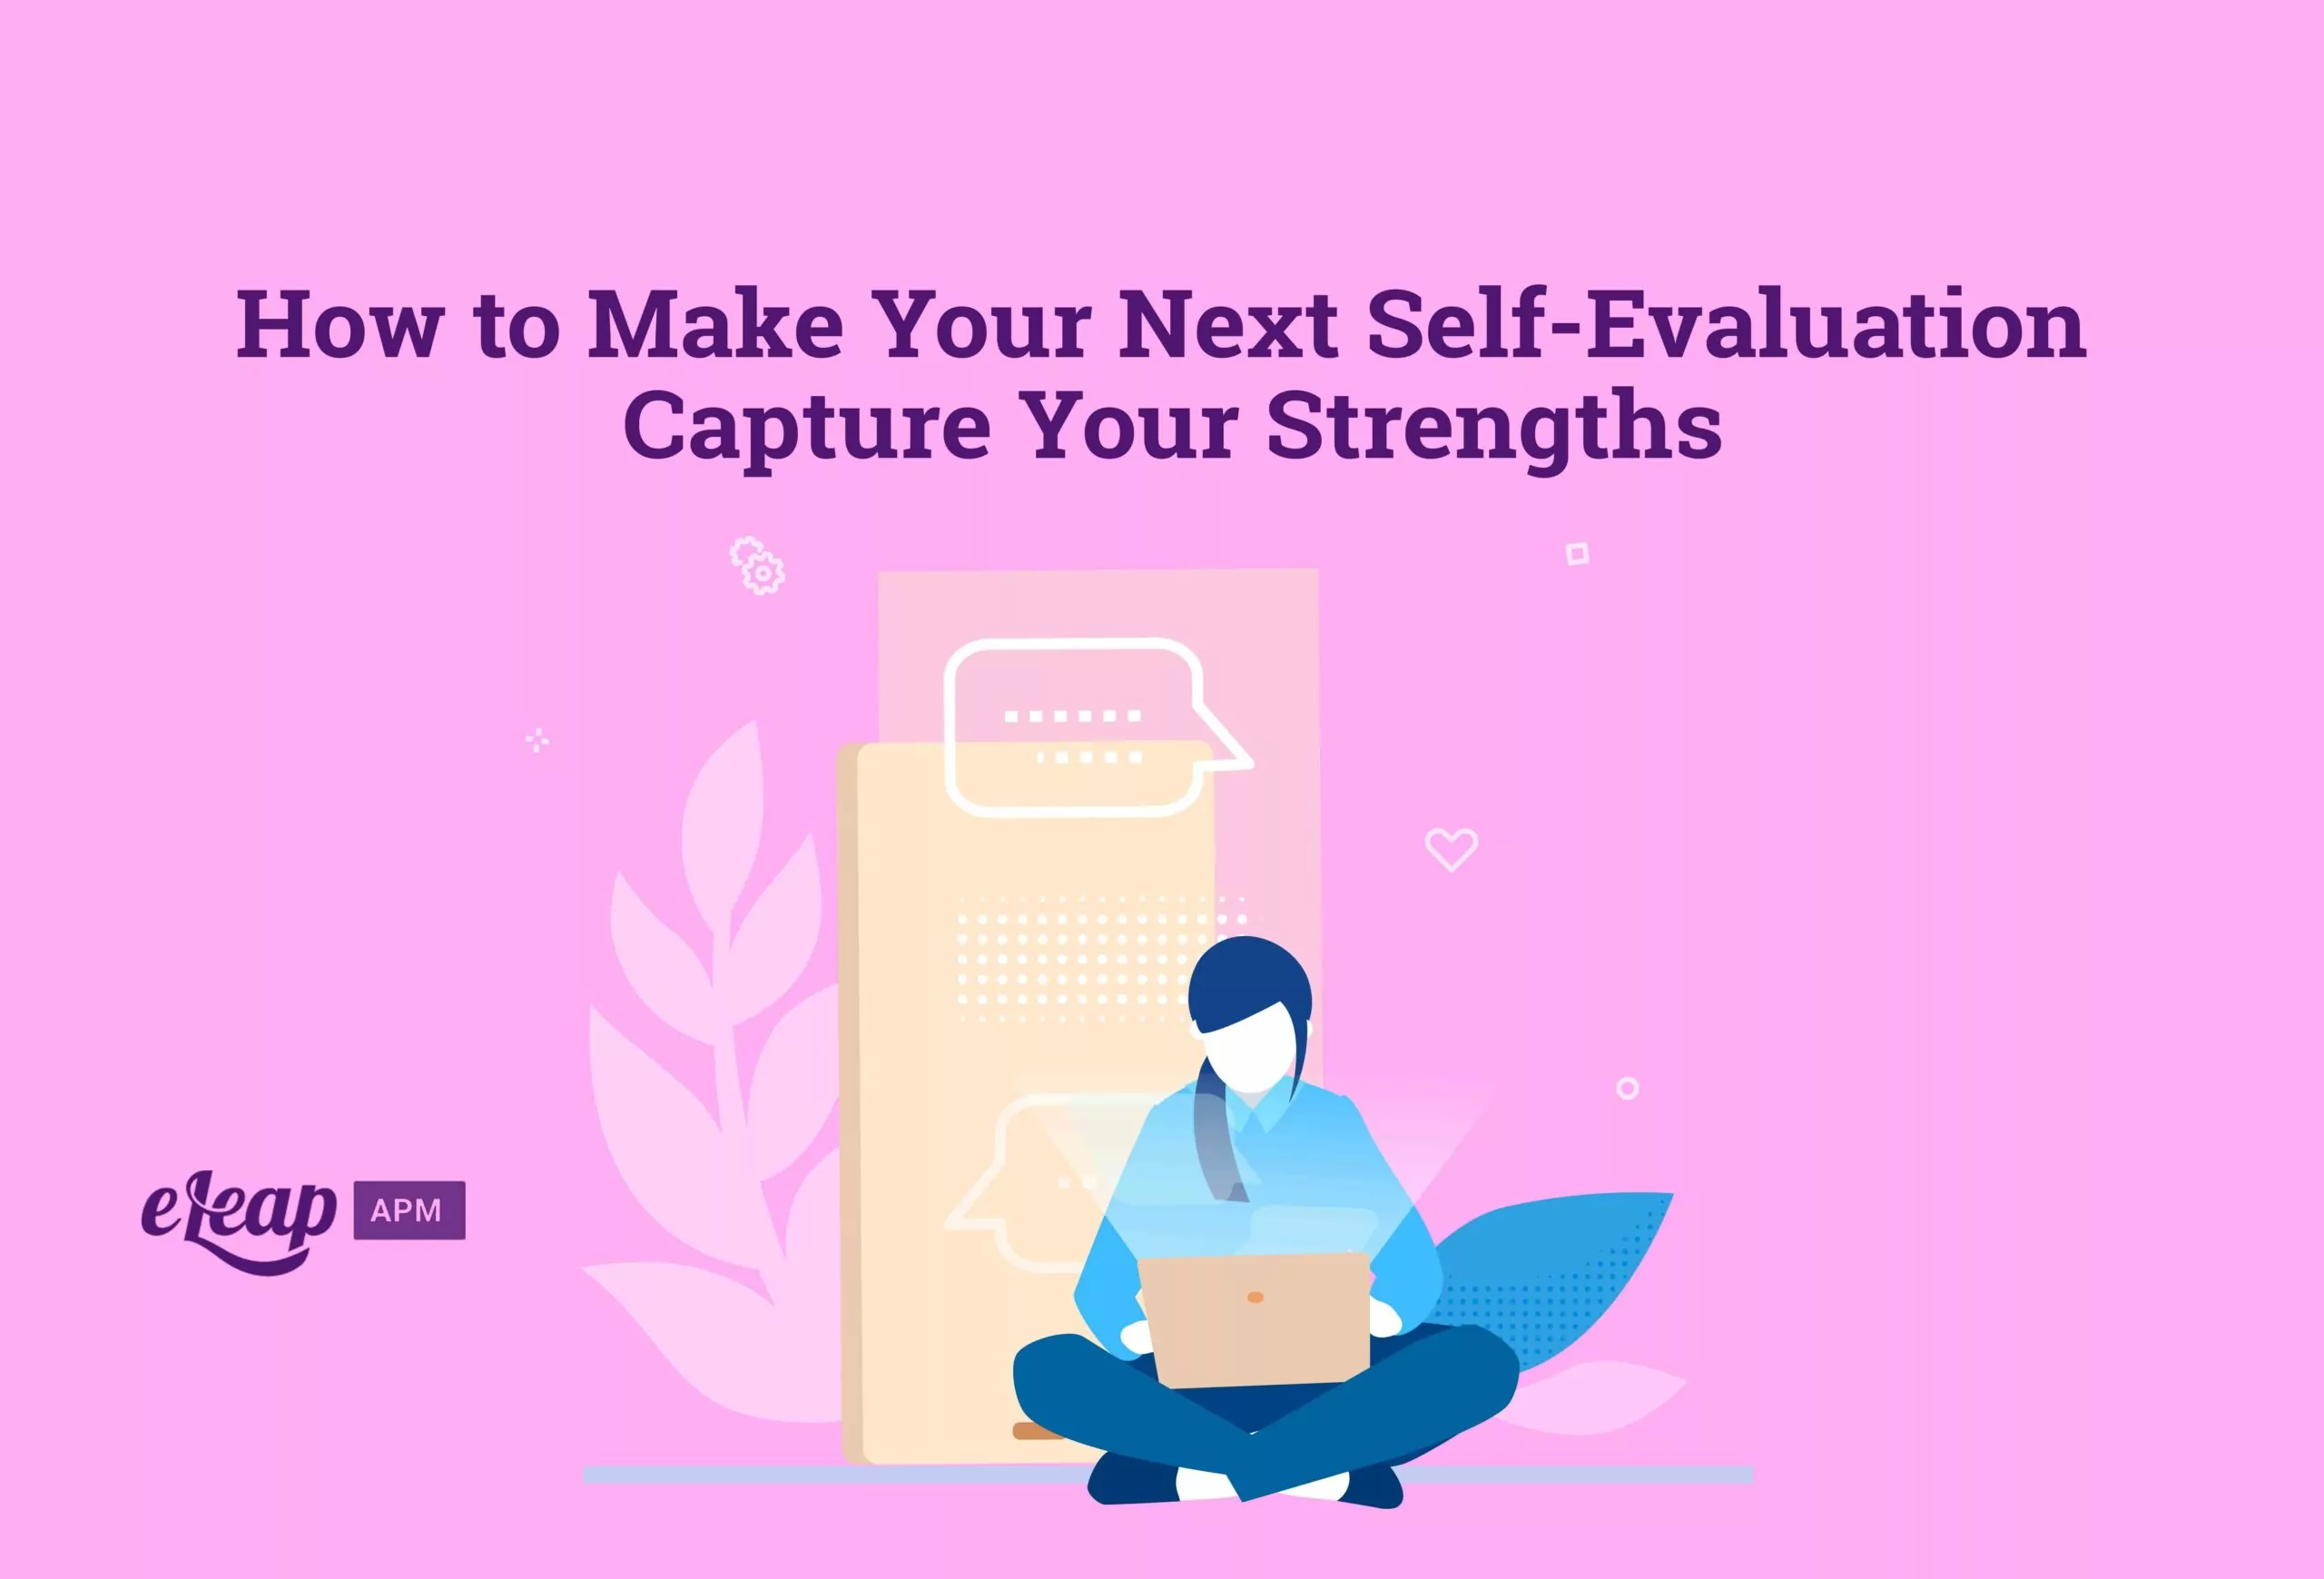 How to Make Your Next Self-Evaluation Capture Your Strengths